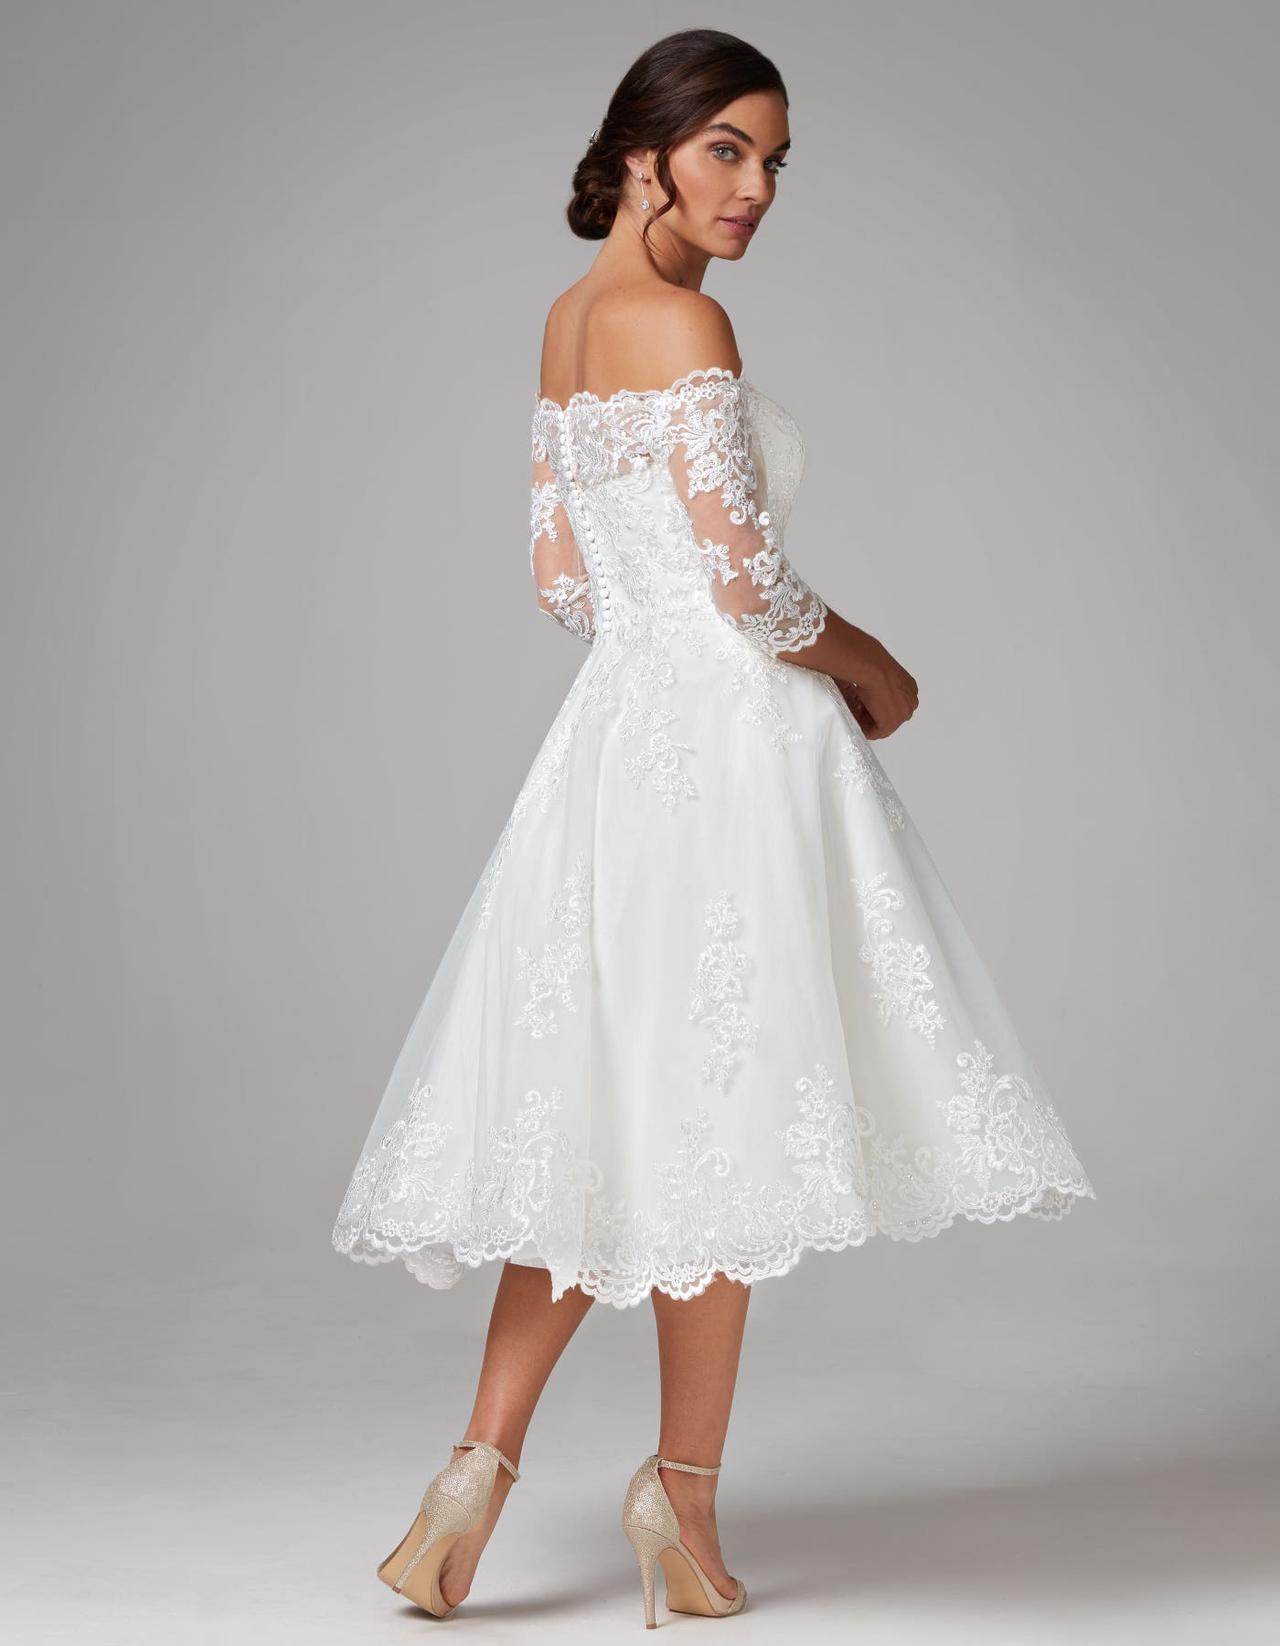 Flutter Sleeve Backless Lace Wedding Dress in White – Chi Chi London